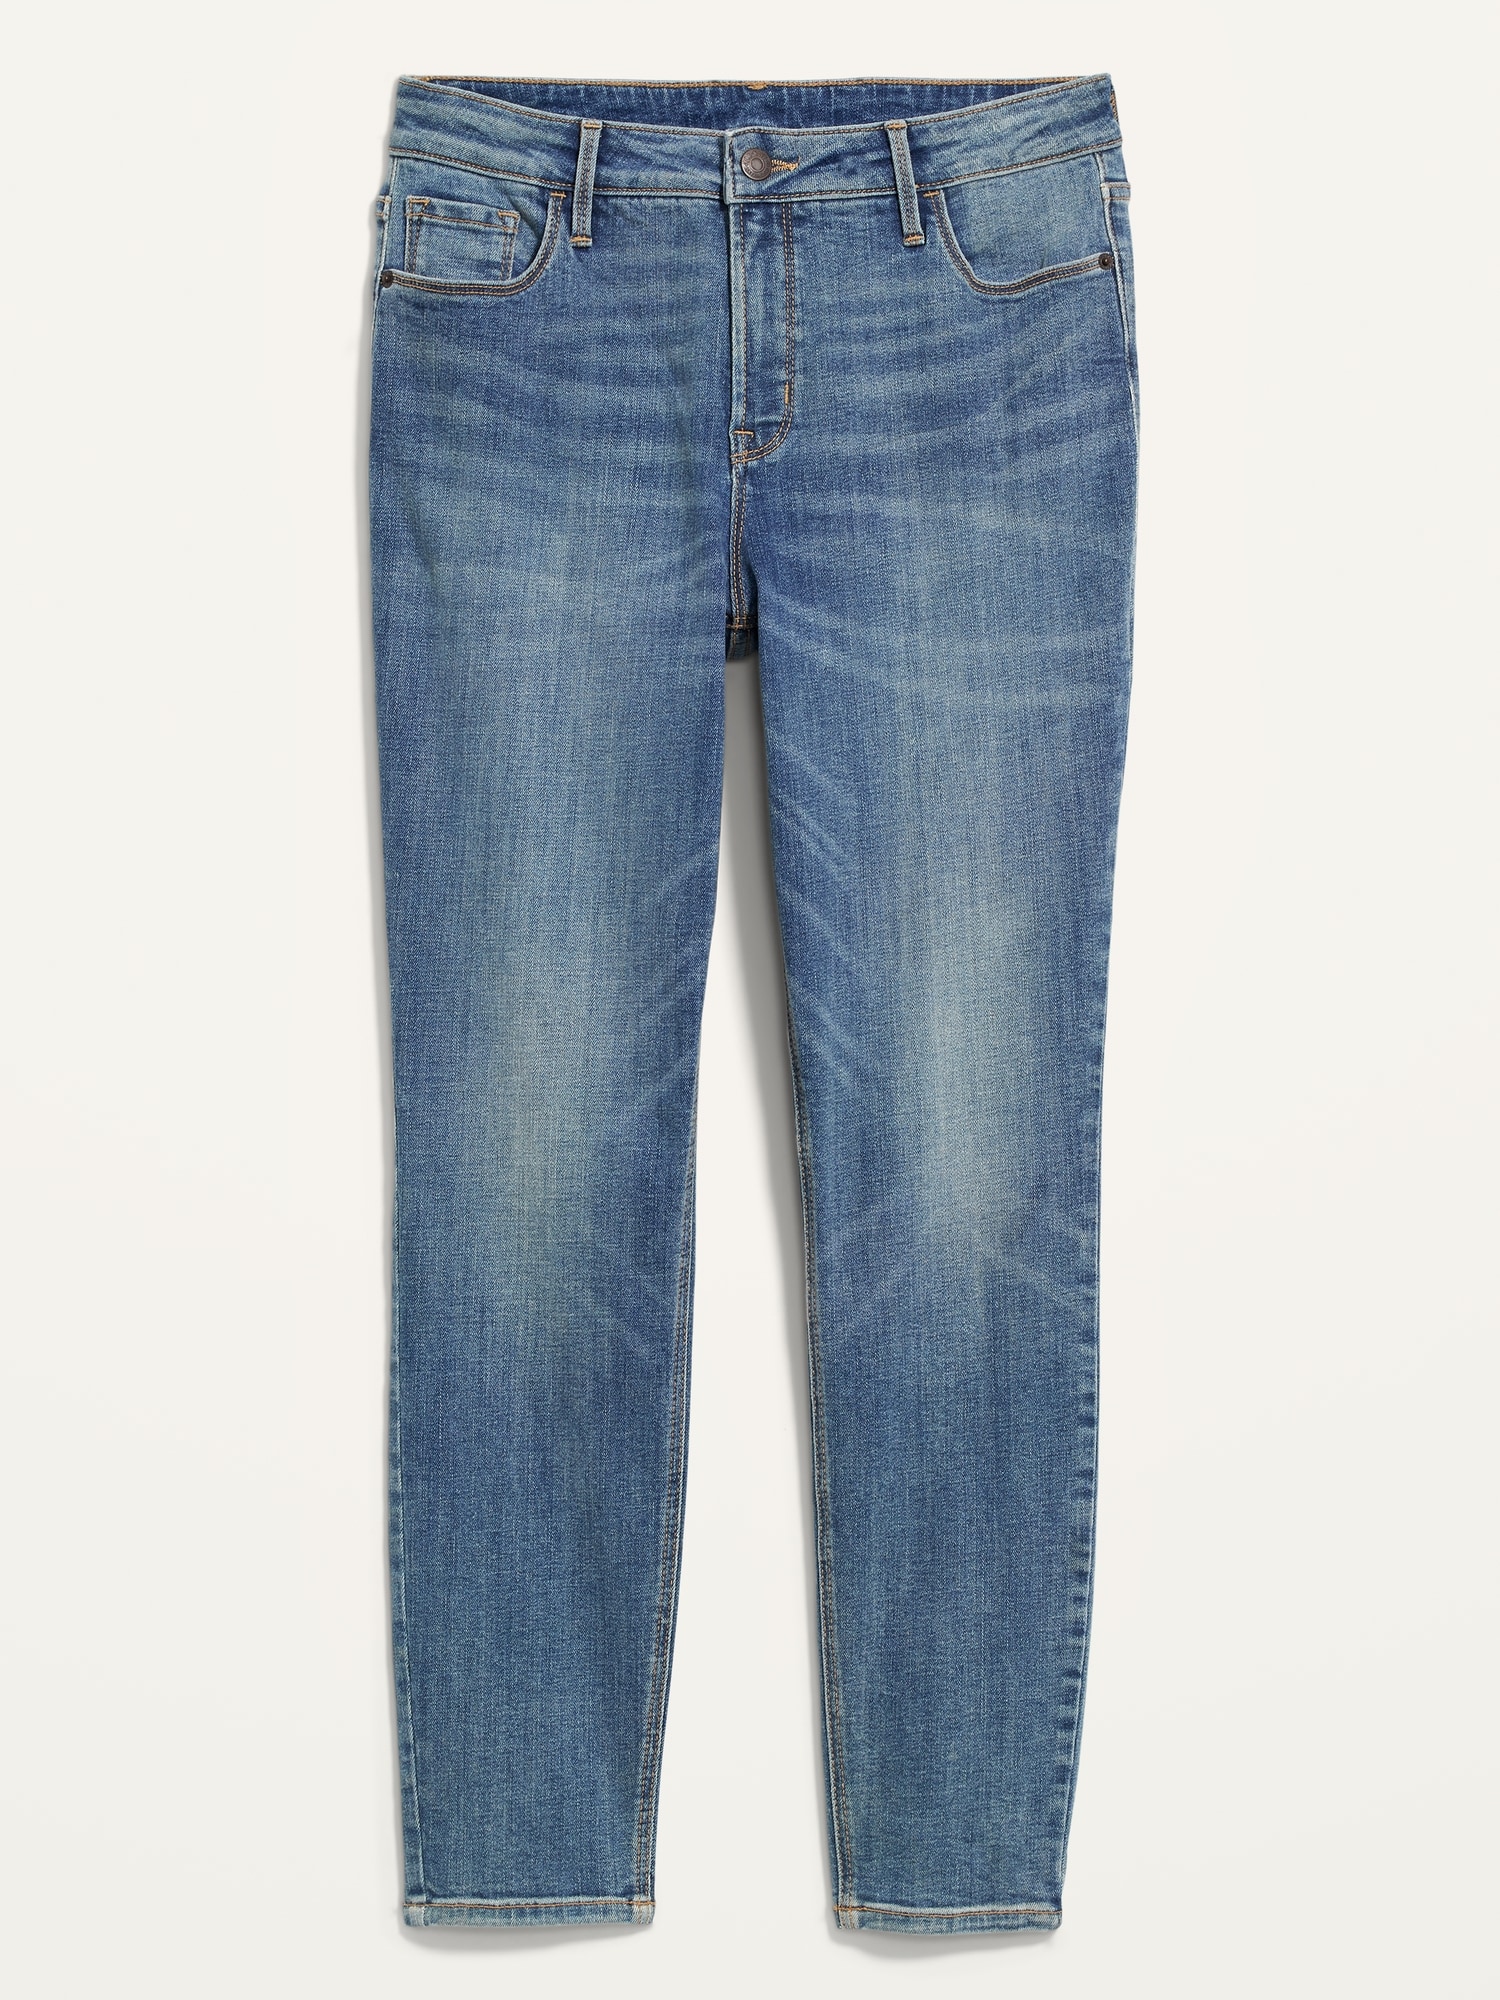 High-Waisted Rockstar Super Skinny Ankle Jeans For Women | Old Navy